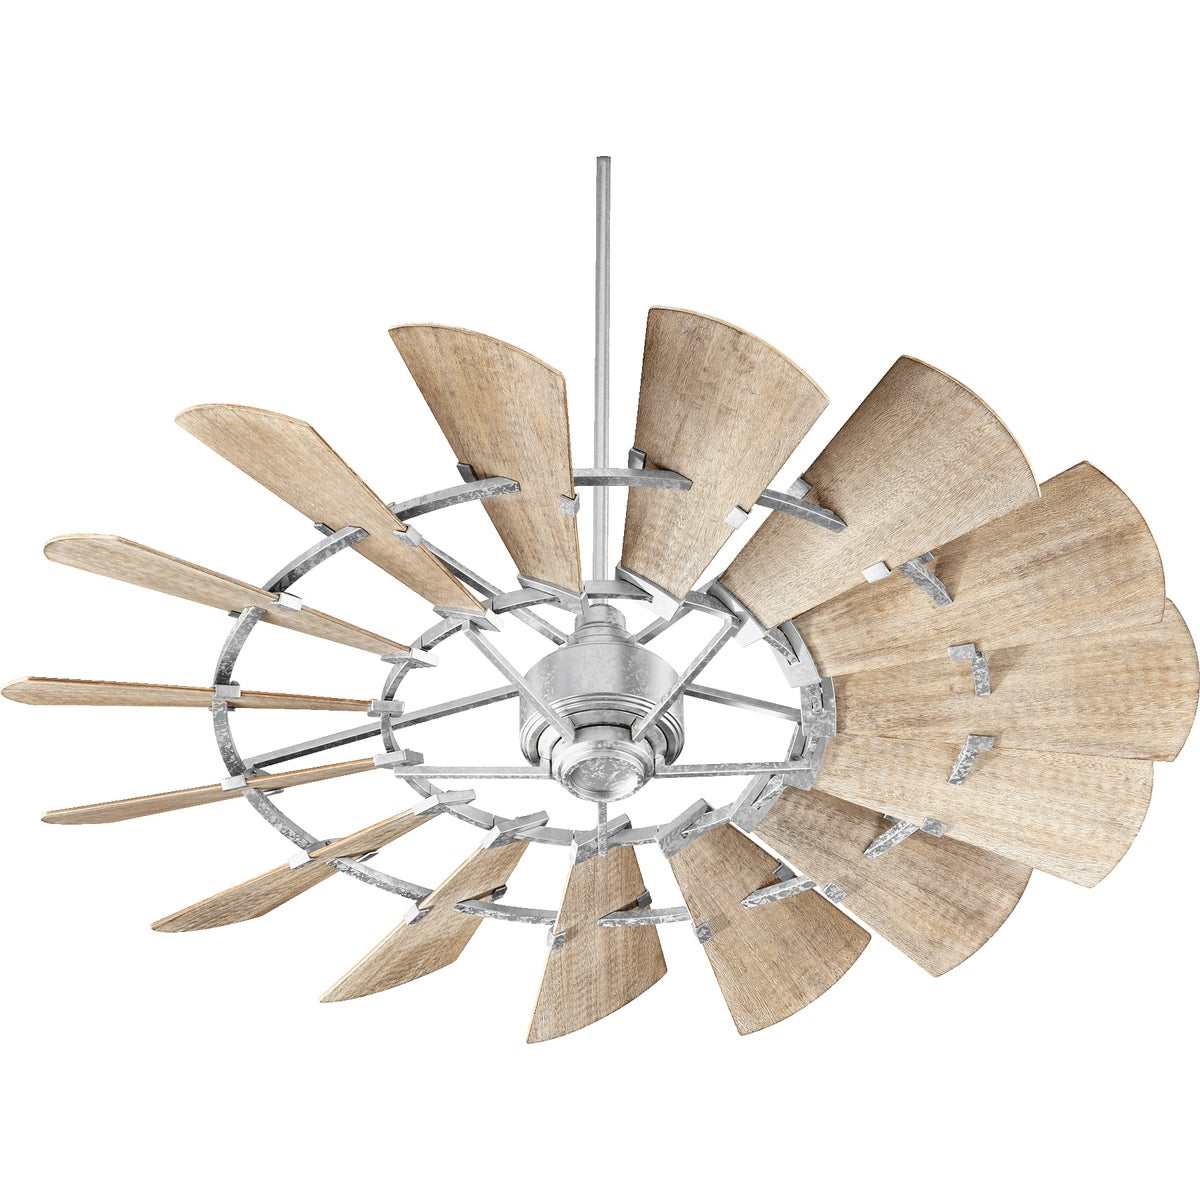 Windmill Ceiling Fan with 15 weathered oak wooden blades, rustic design. UL Listed, Dry Location. Dimensions: 16.5"H x 60"W. Limited Lifetime Warranty.